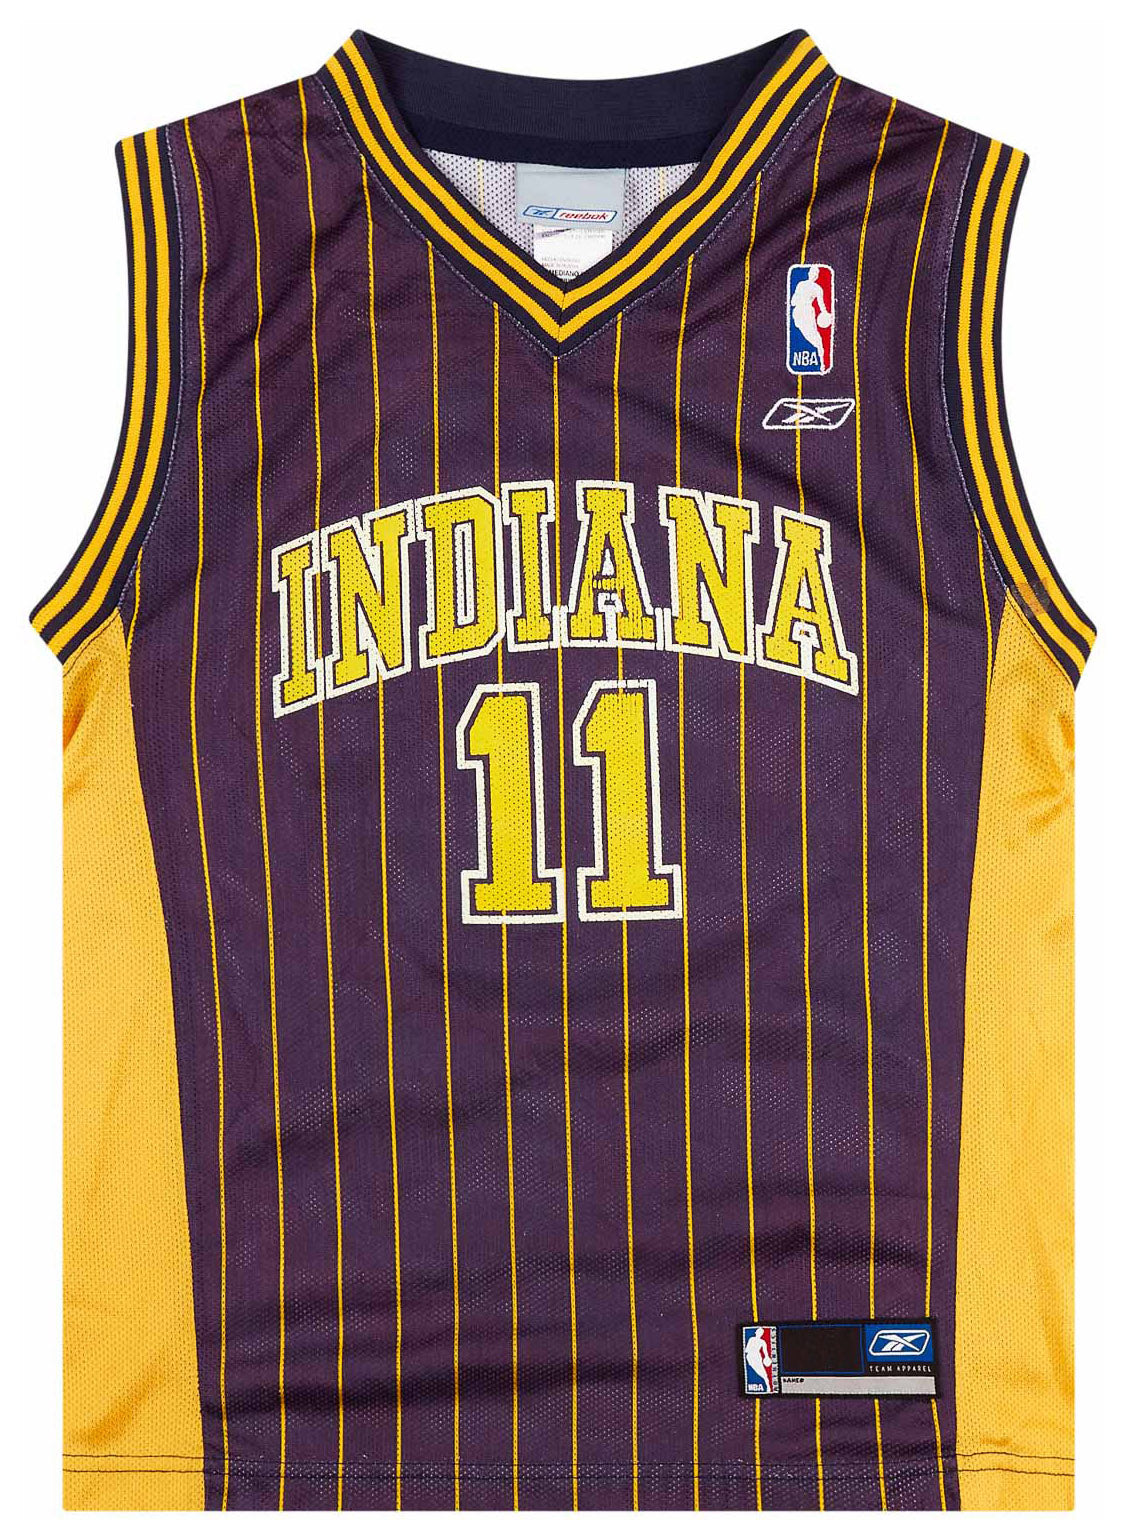 2002-05 INDIANA PACERS TINSLEY #11 REEBOK JERSEY (AWAY) Y